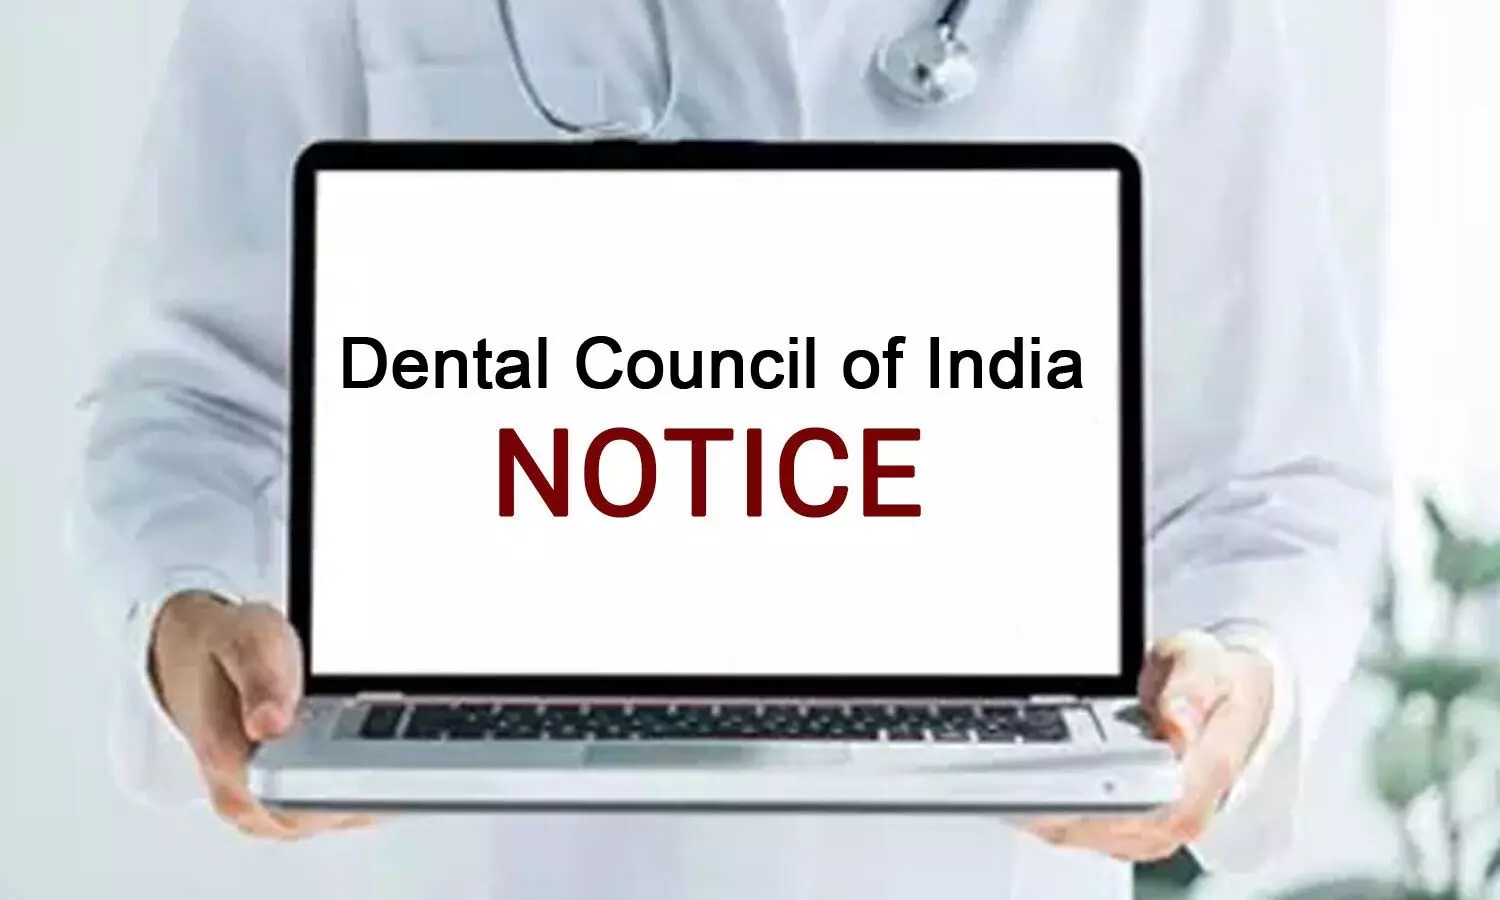 DCI asks dental colleges to apply for renewal of permission for BDS, MDS courses